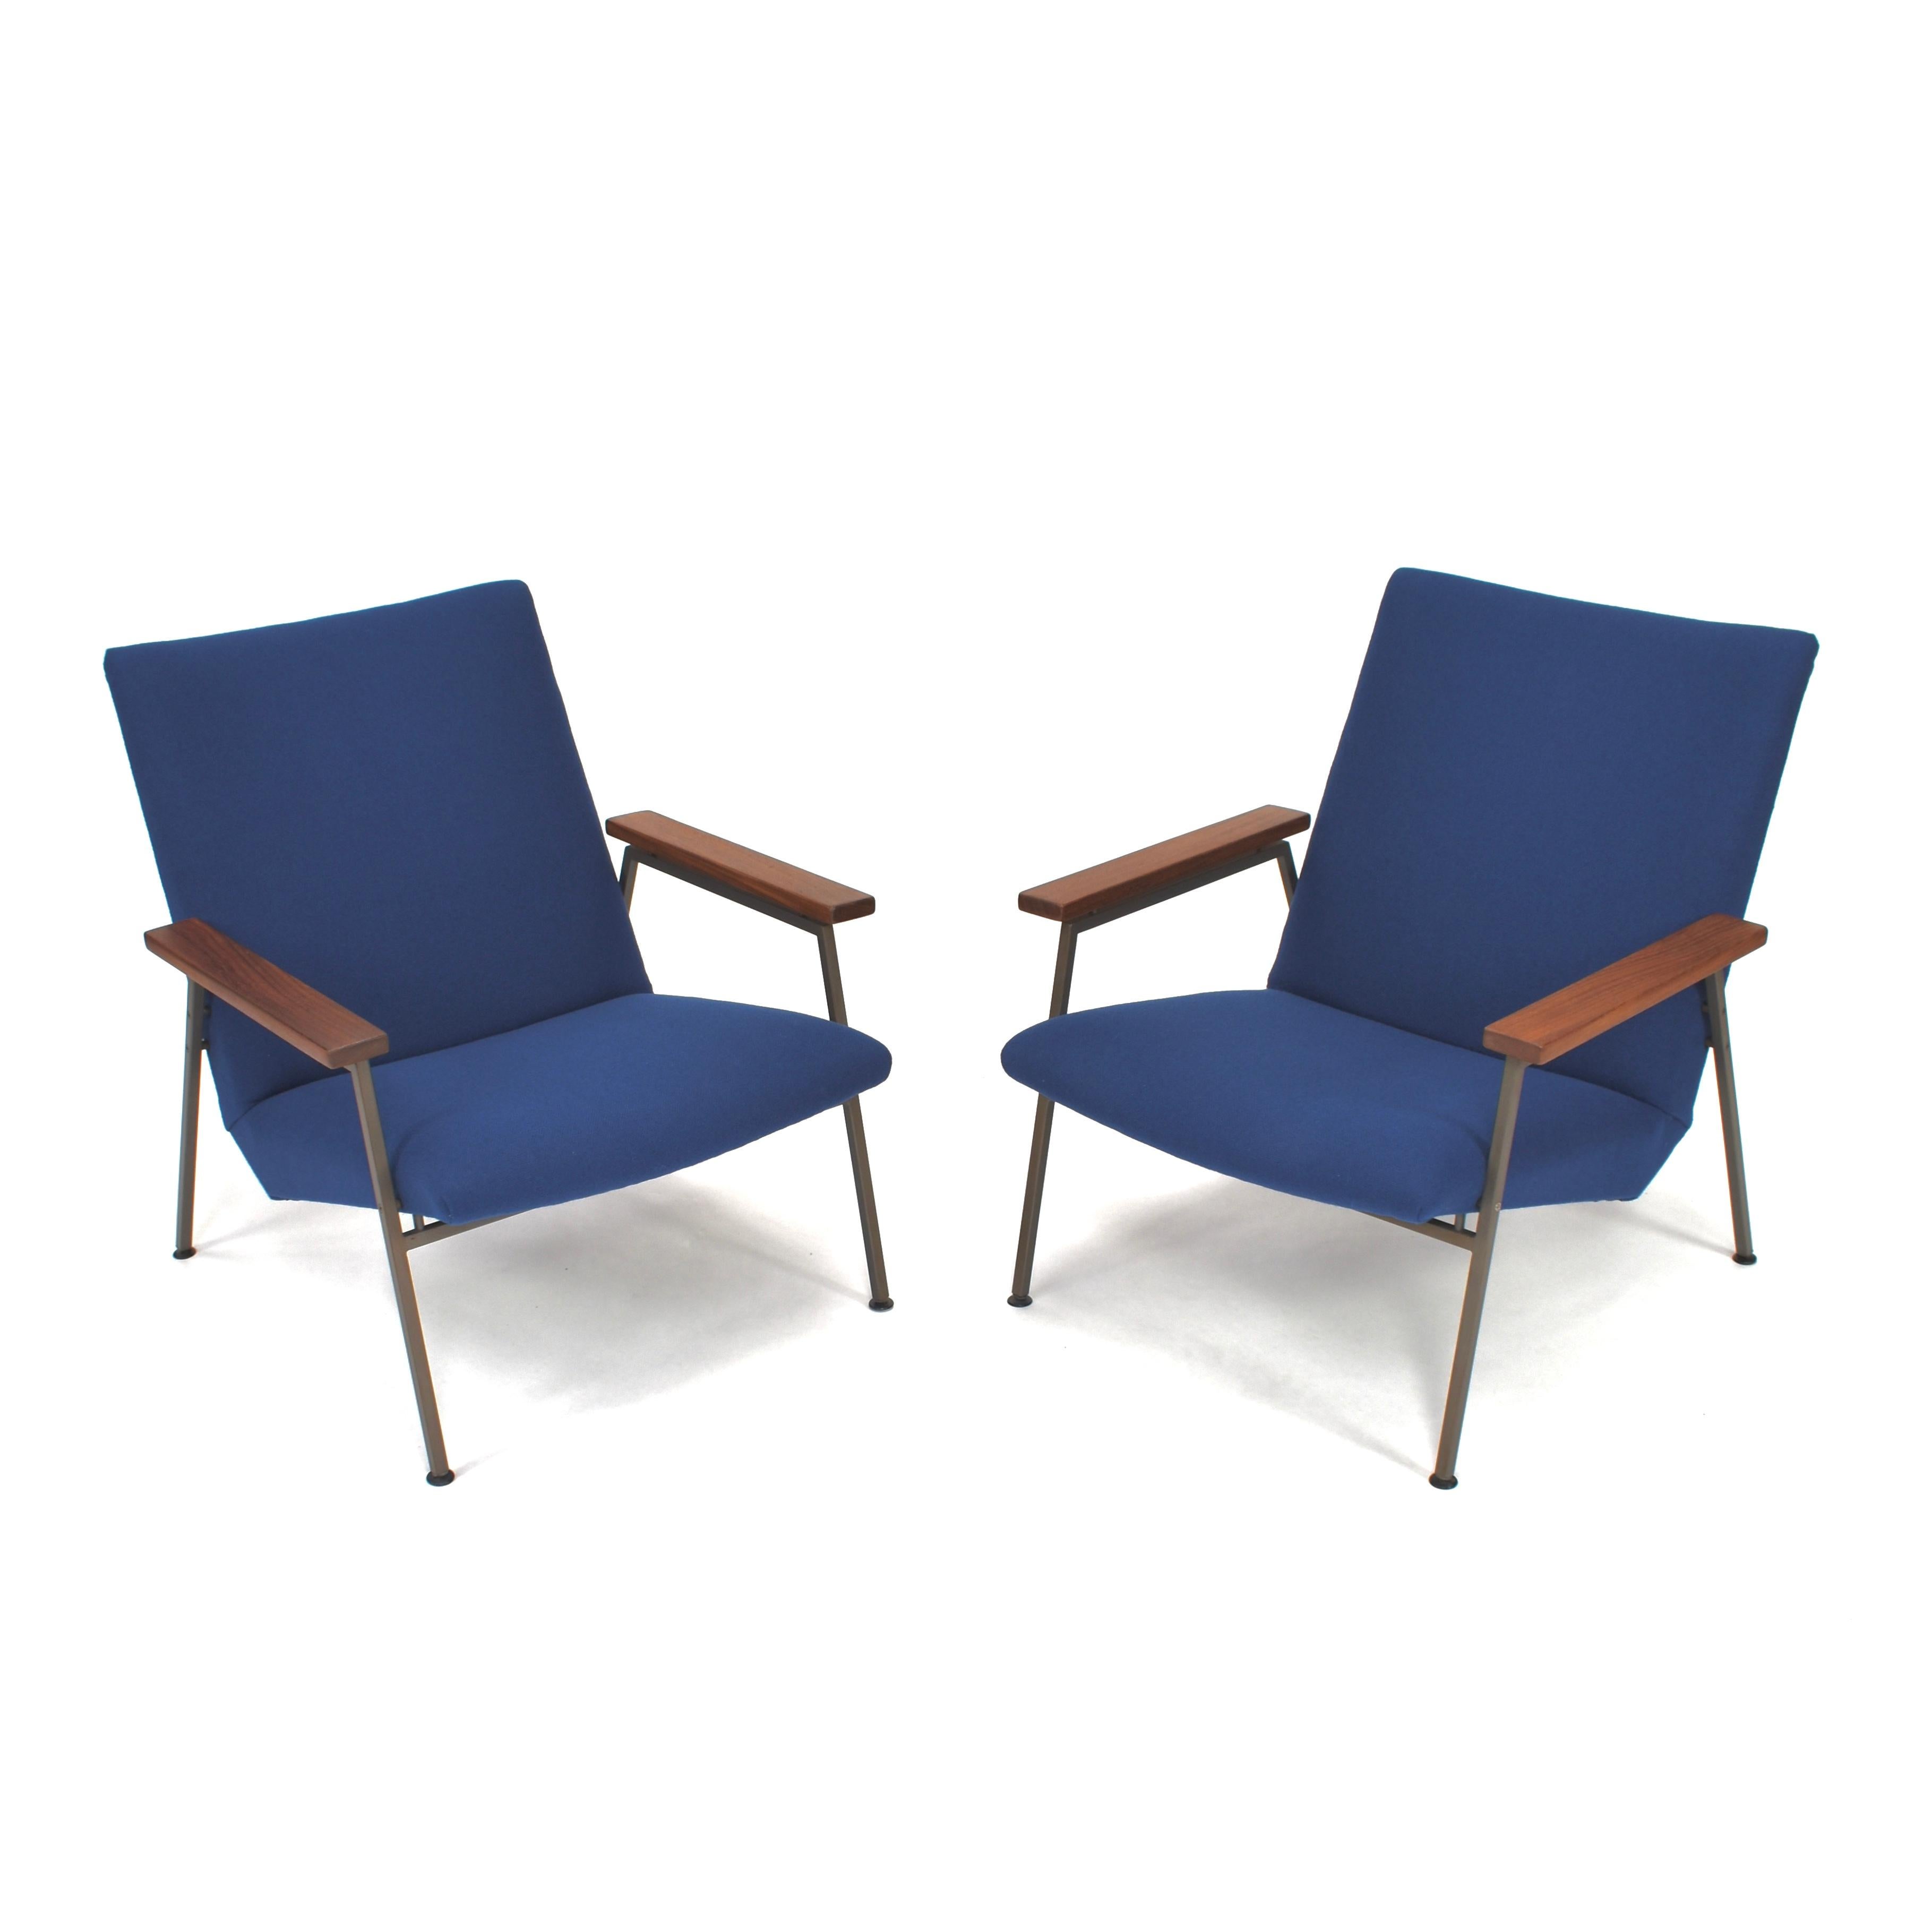 Fabric Pair of Rob Parry Lounge Armchairs with New Kvadrat Upholstery, circa 1950